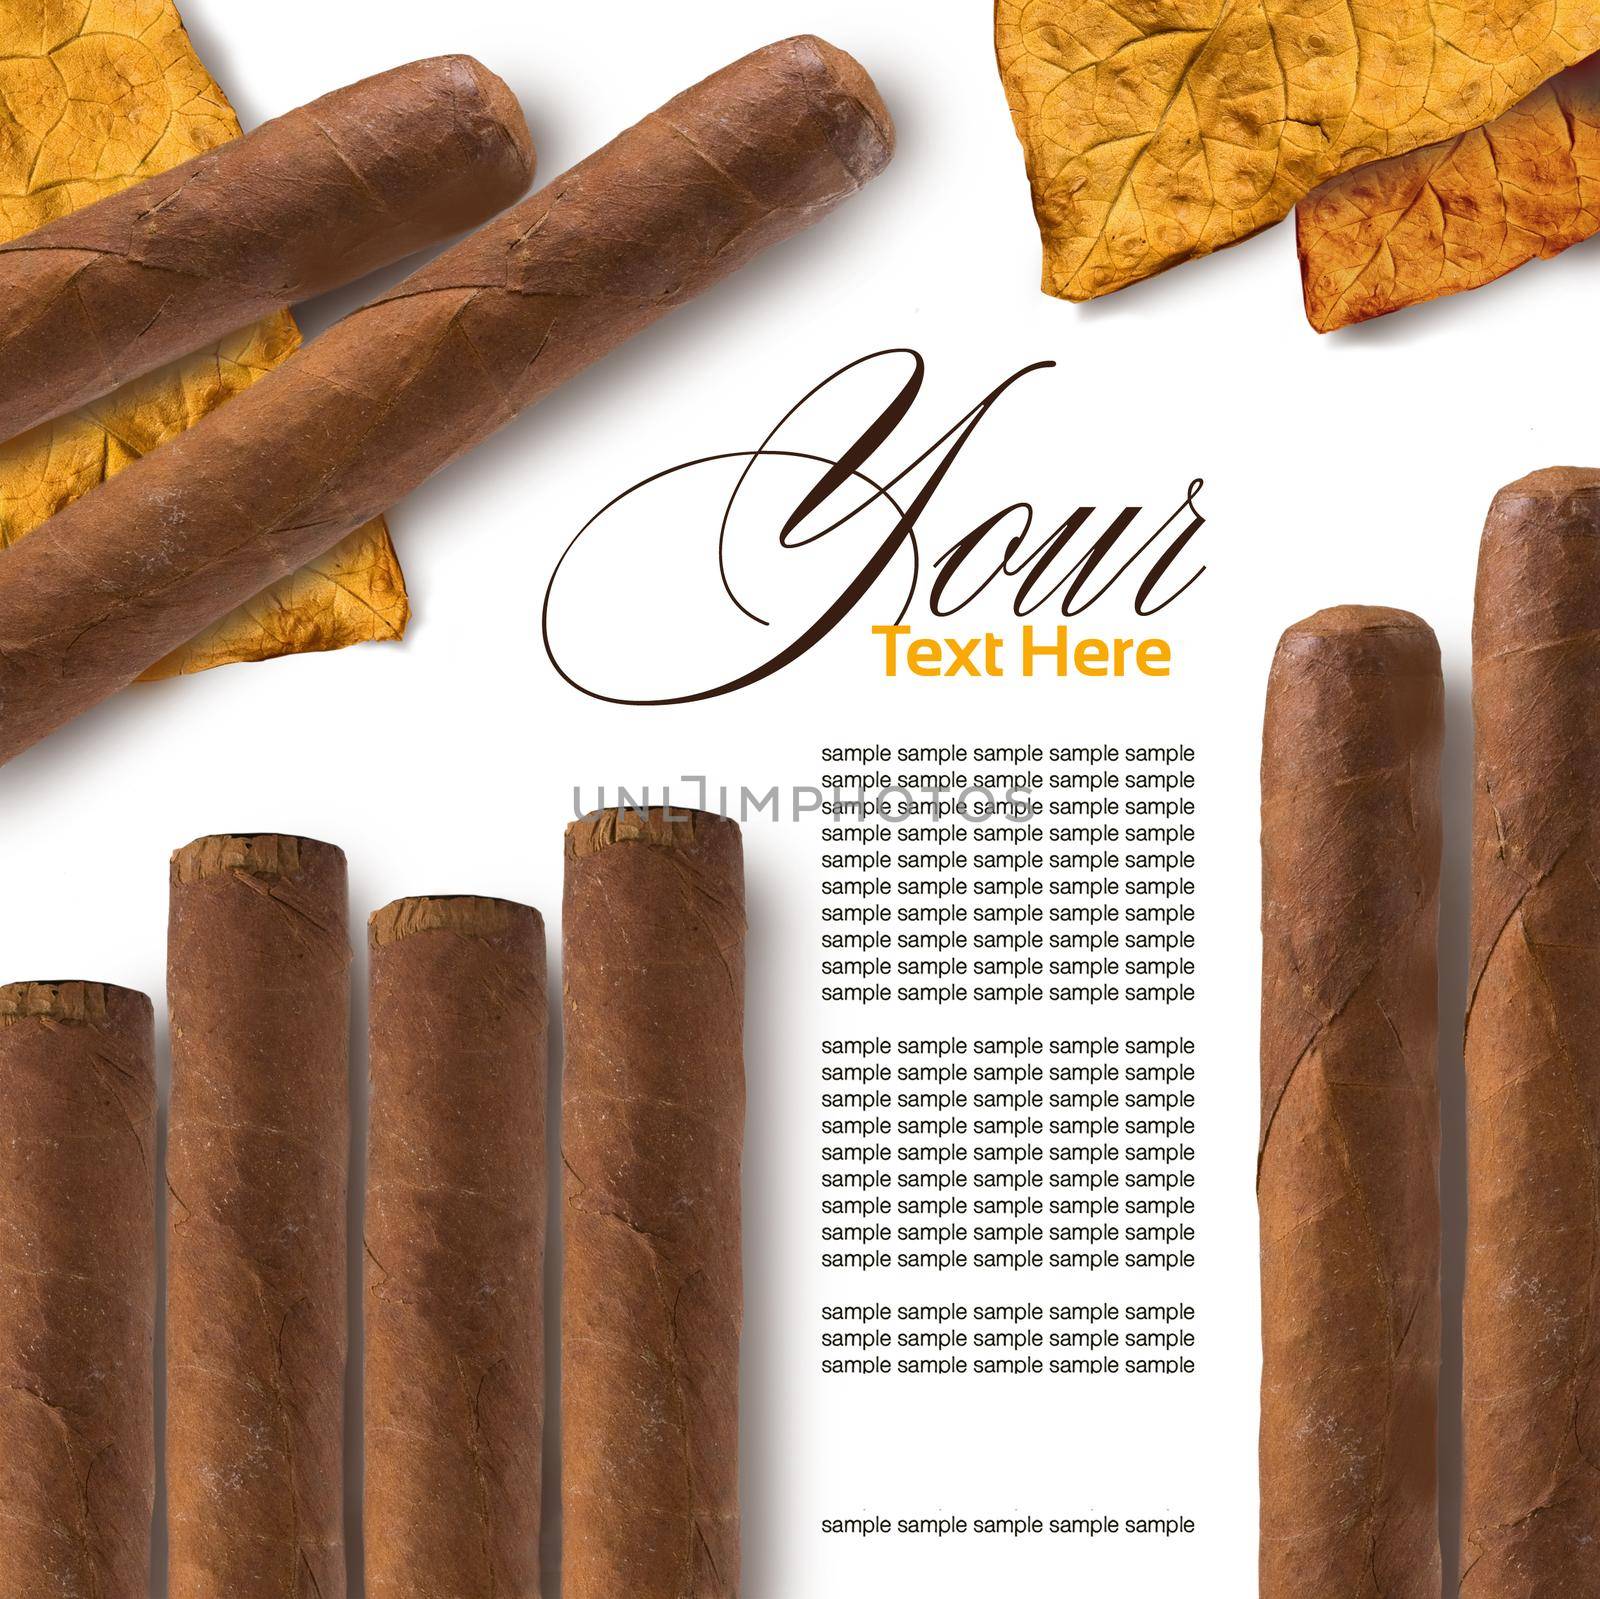 Cigars in a row close-up, may be used as background
